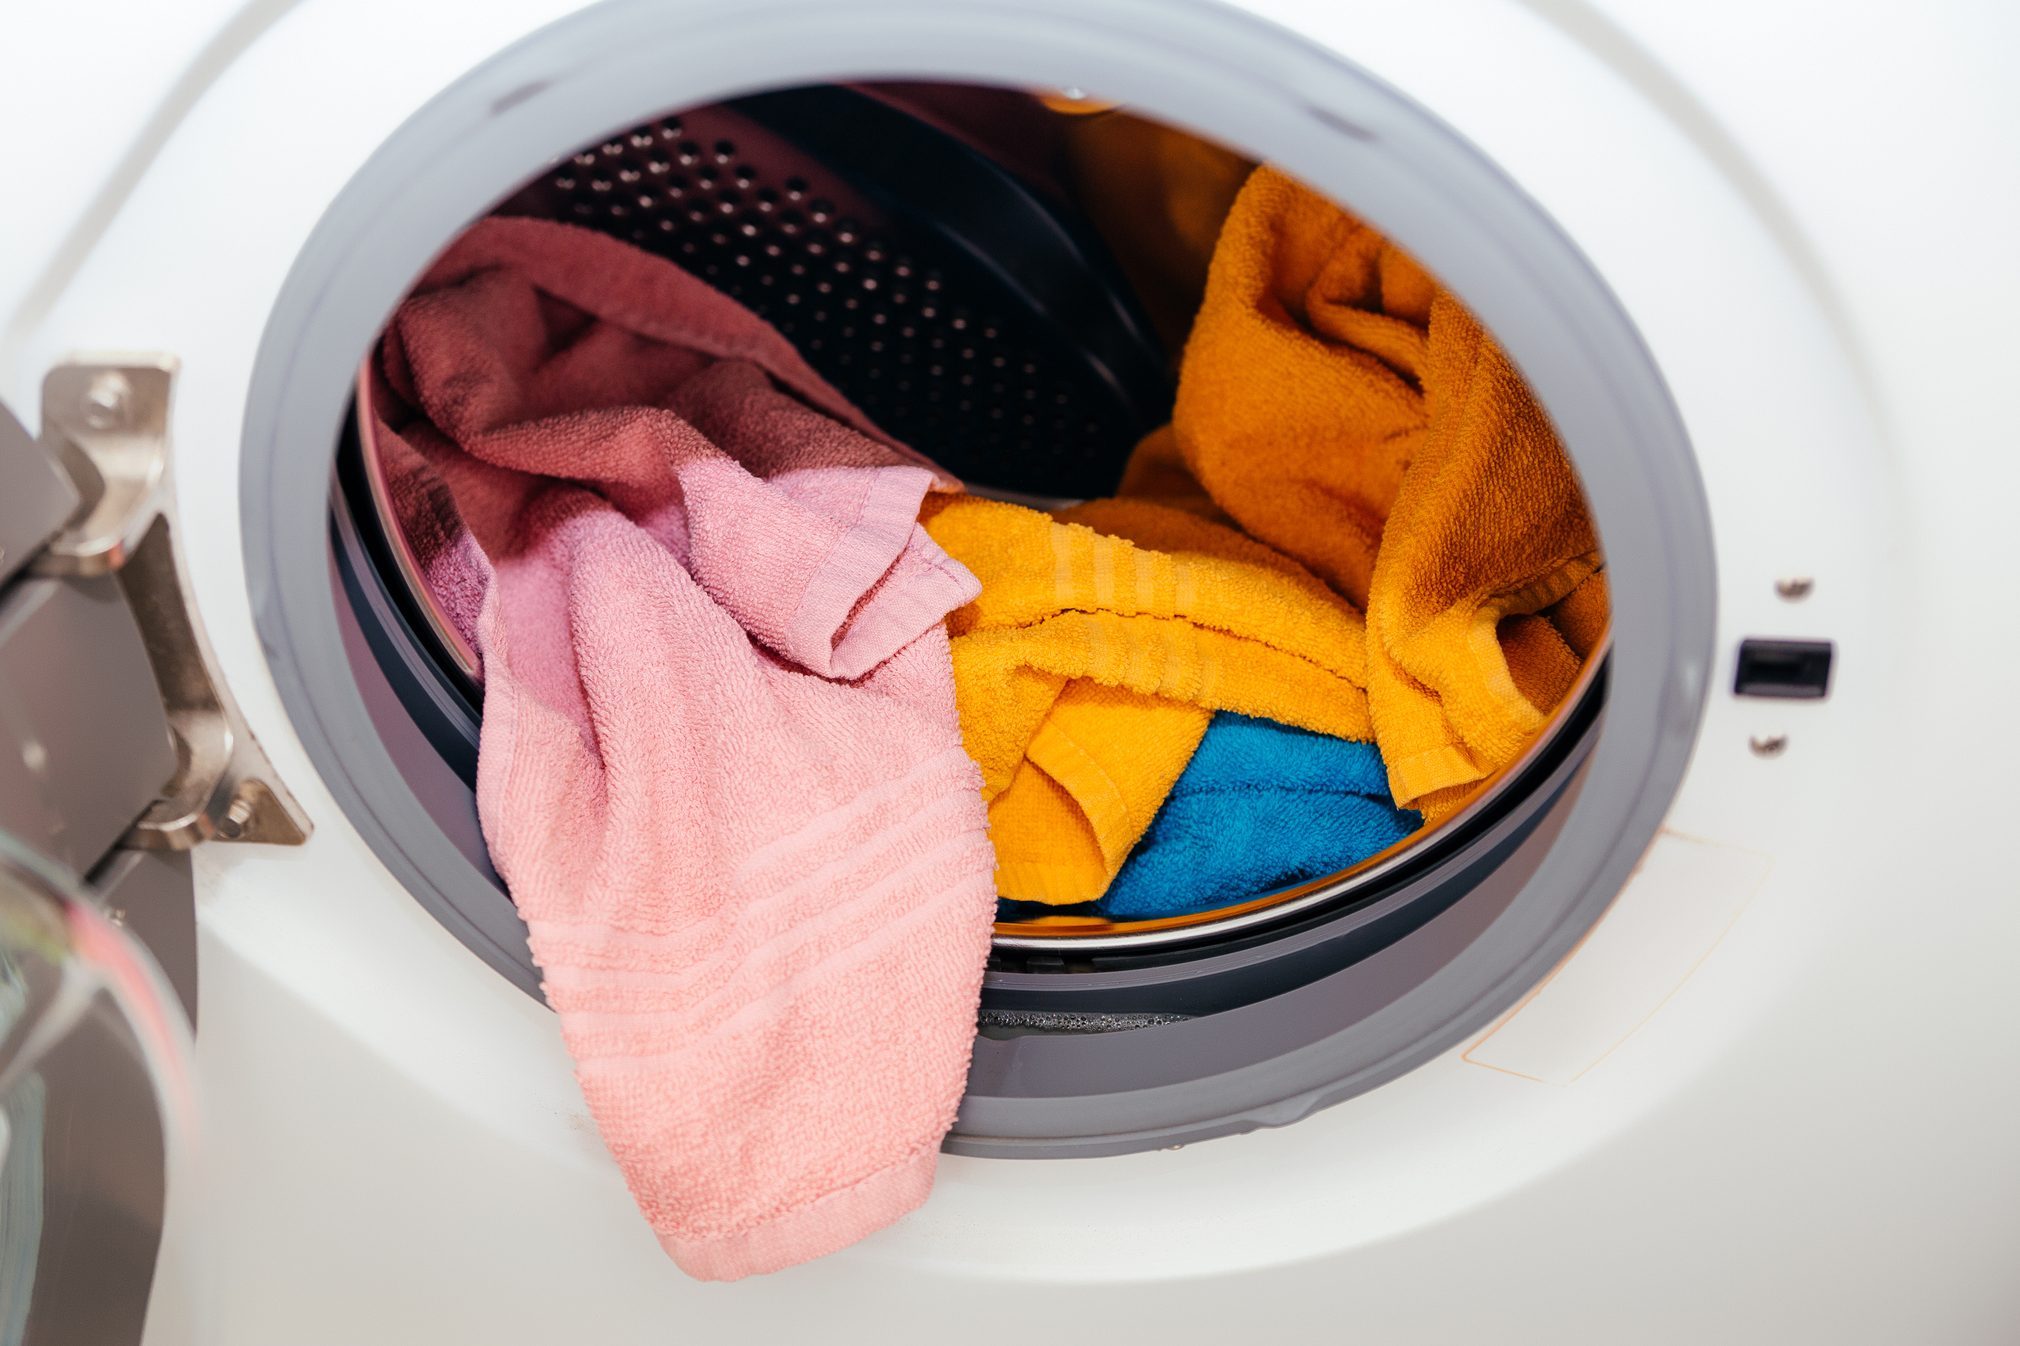 Colored towels in an open washing machine.